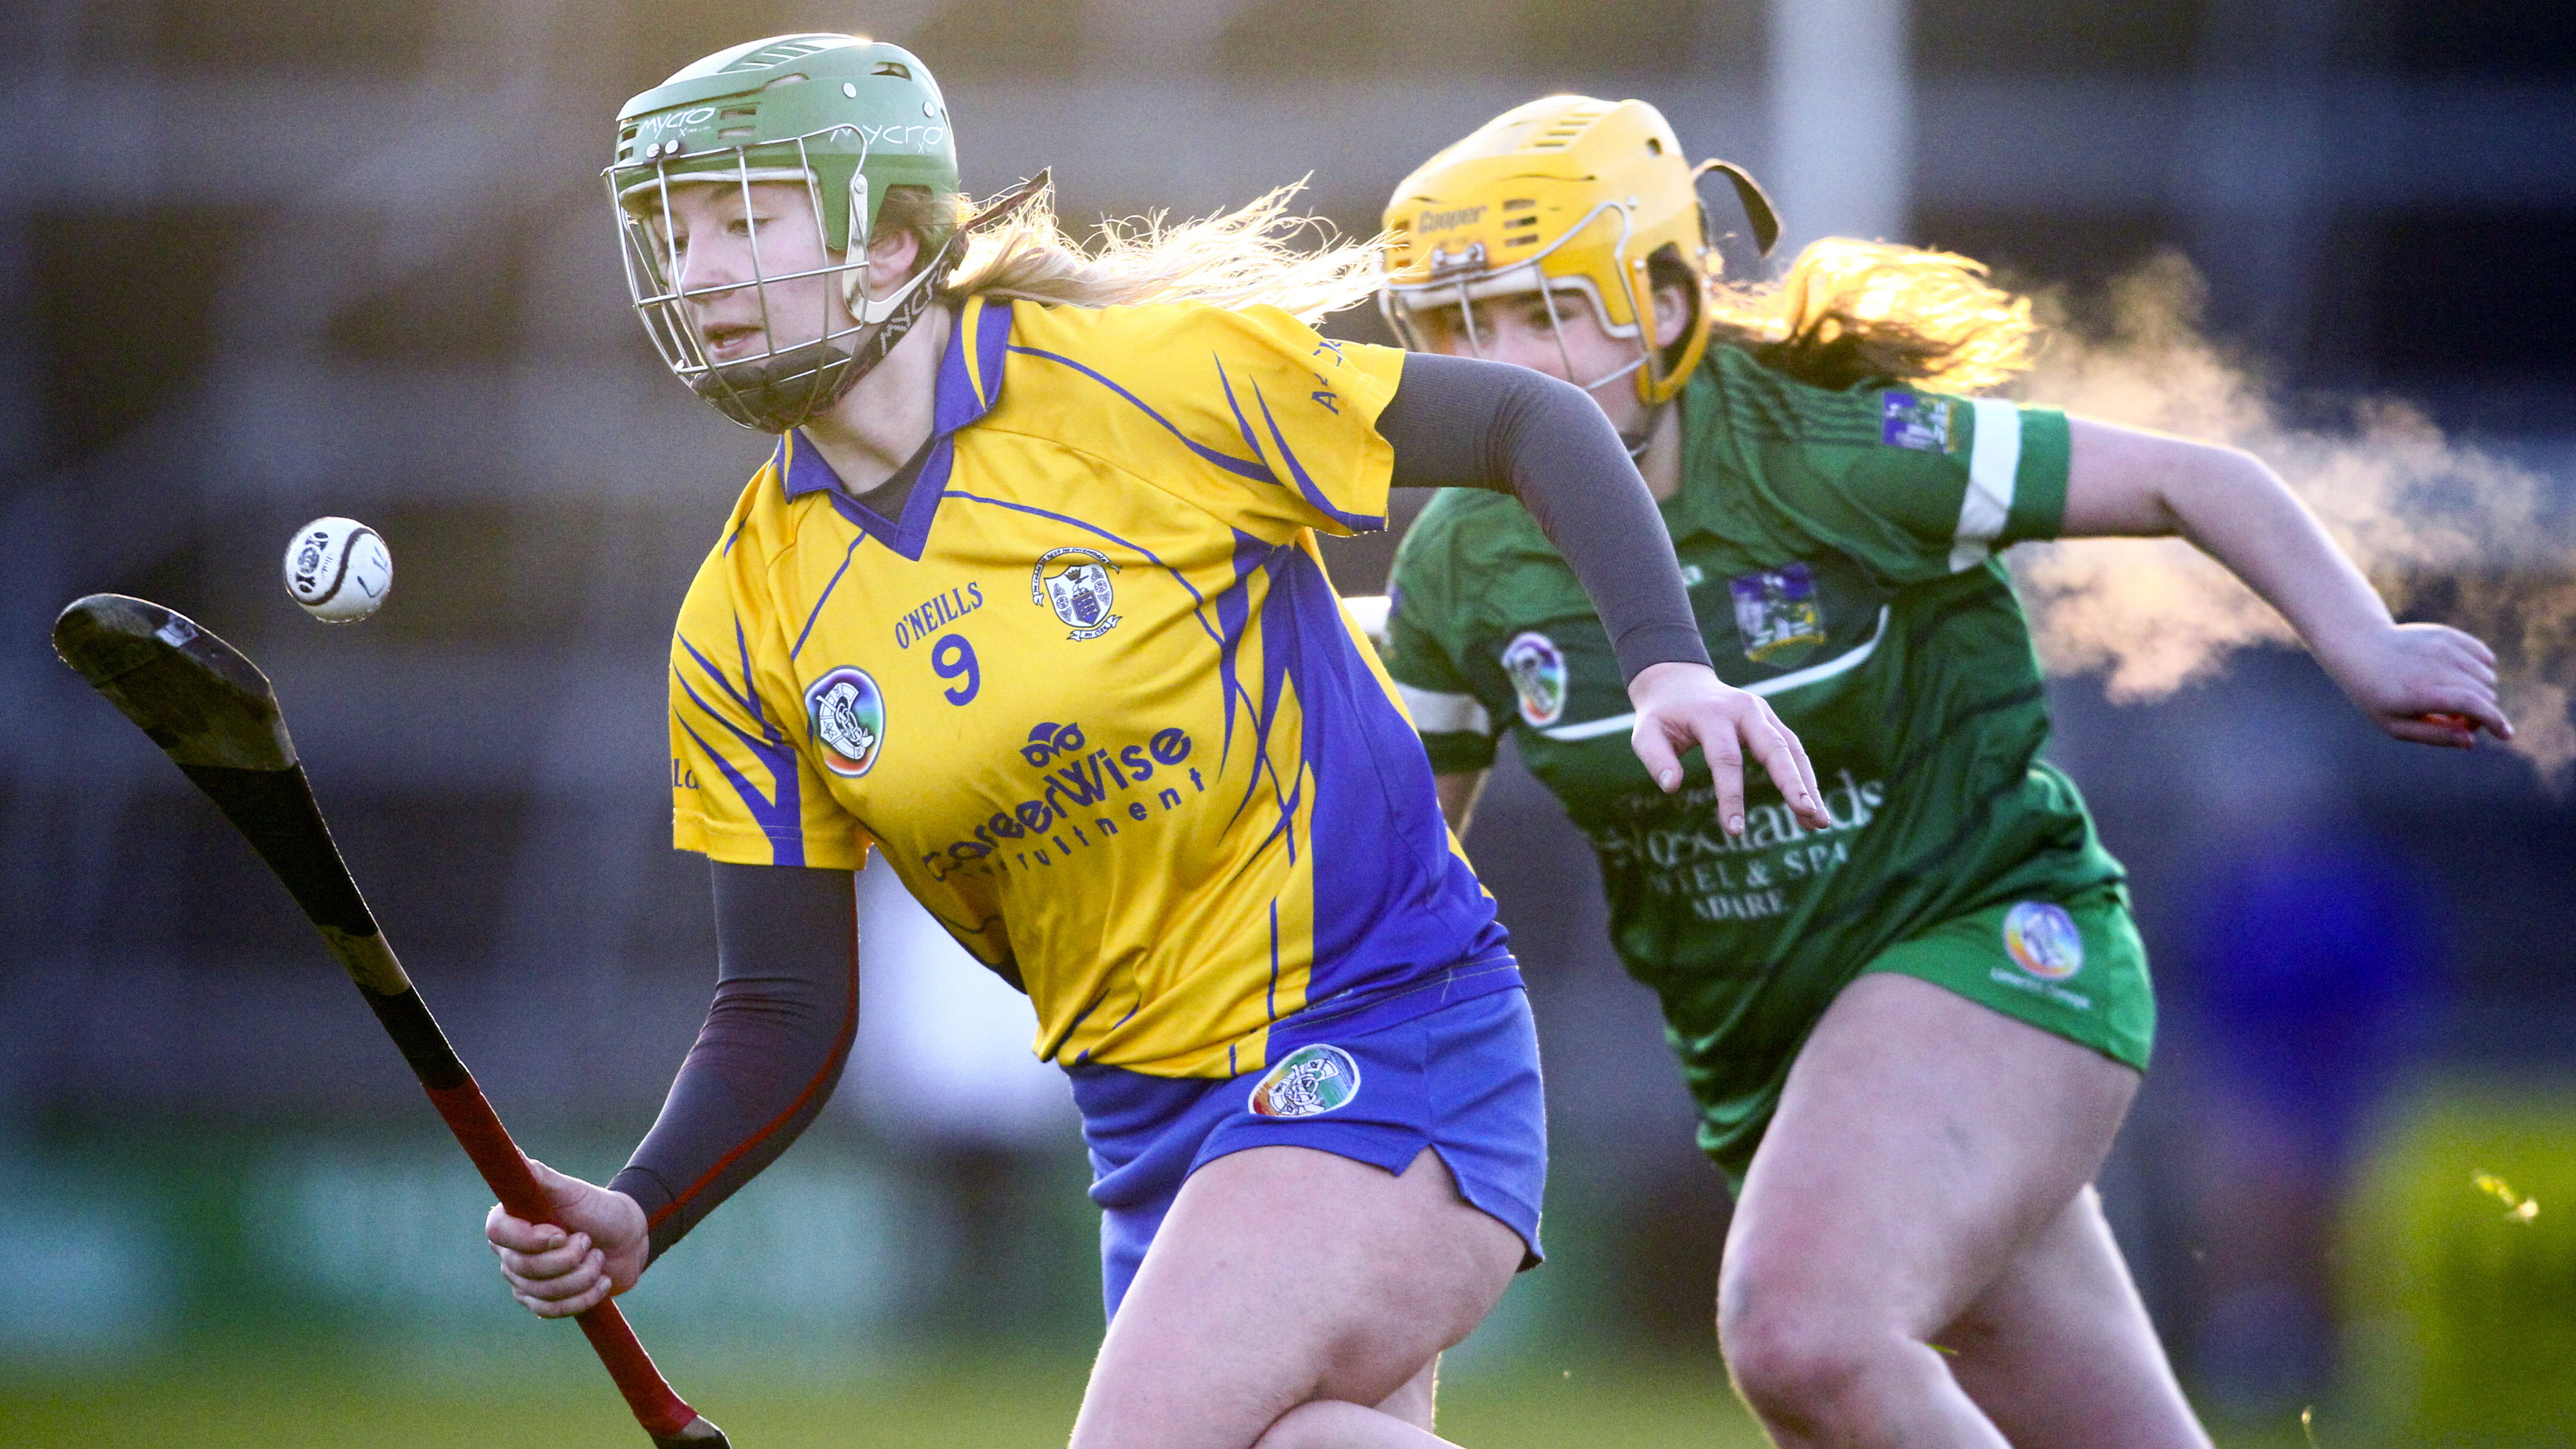 2019 Liberty Insurance All-Ireland Senior Camogie Championship – Waterford 2-10 Clare 0-12